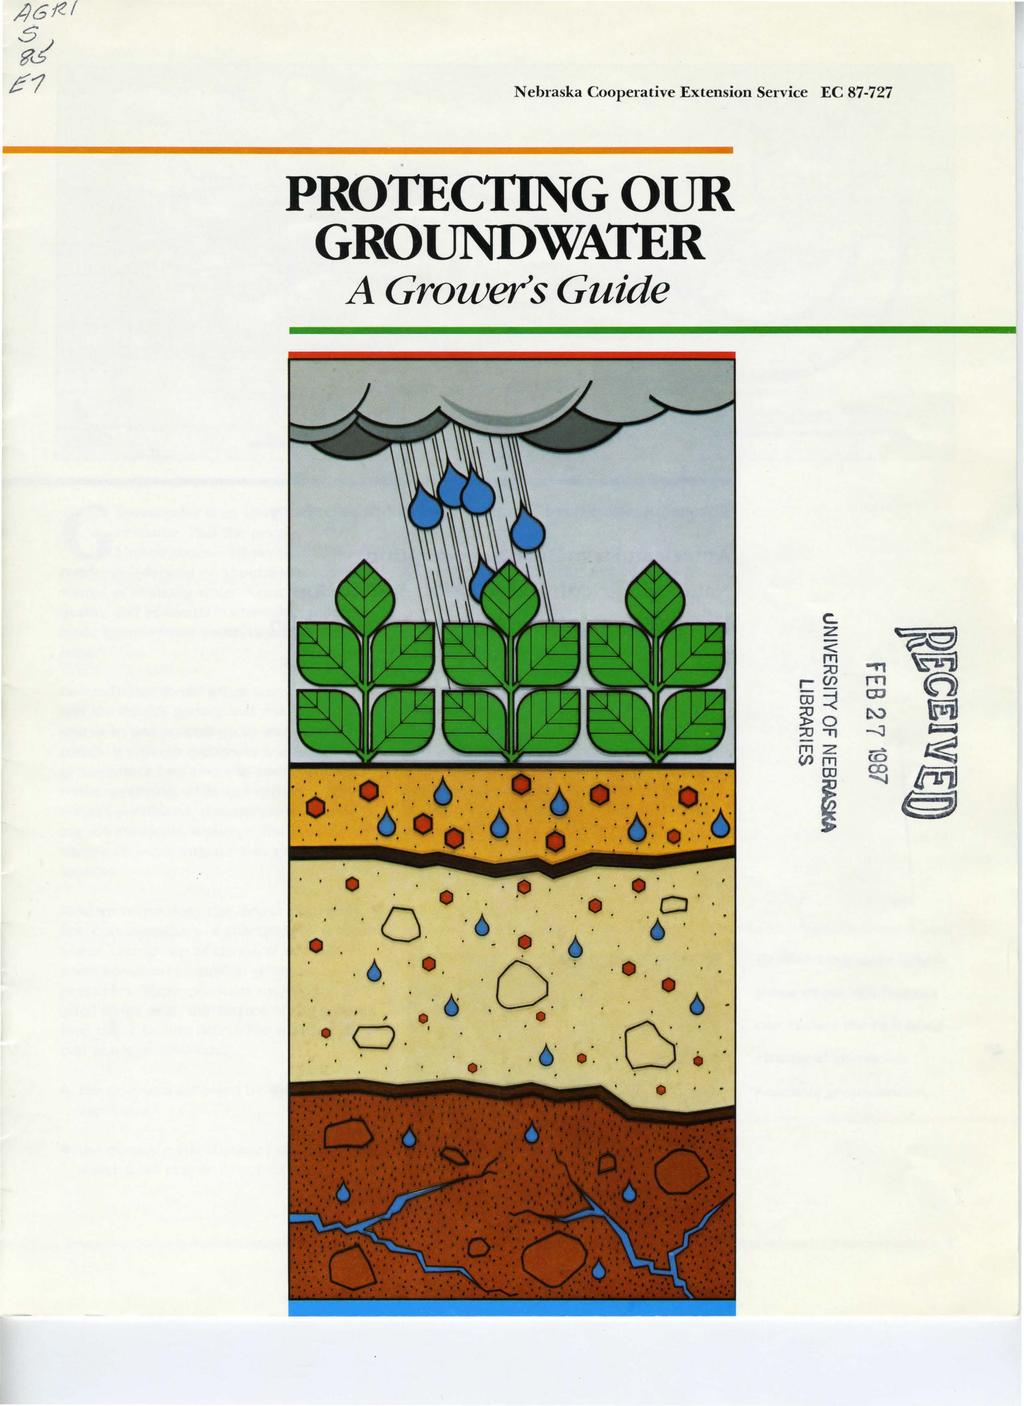 Nebraska Cooperative Extension Service EC 87-727 PROTECTING OUR GROUNDWATER A Grower's Guide c.